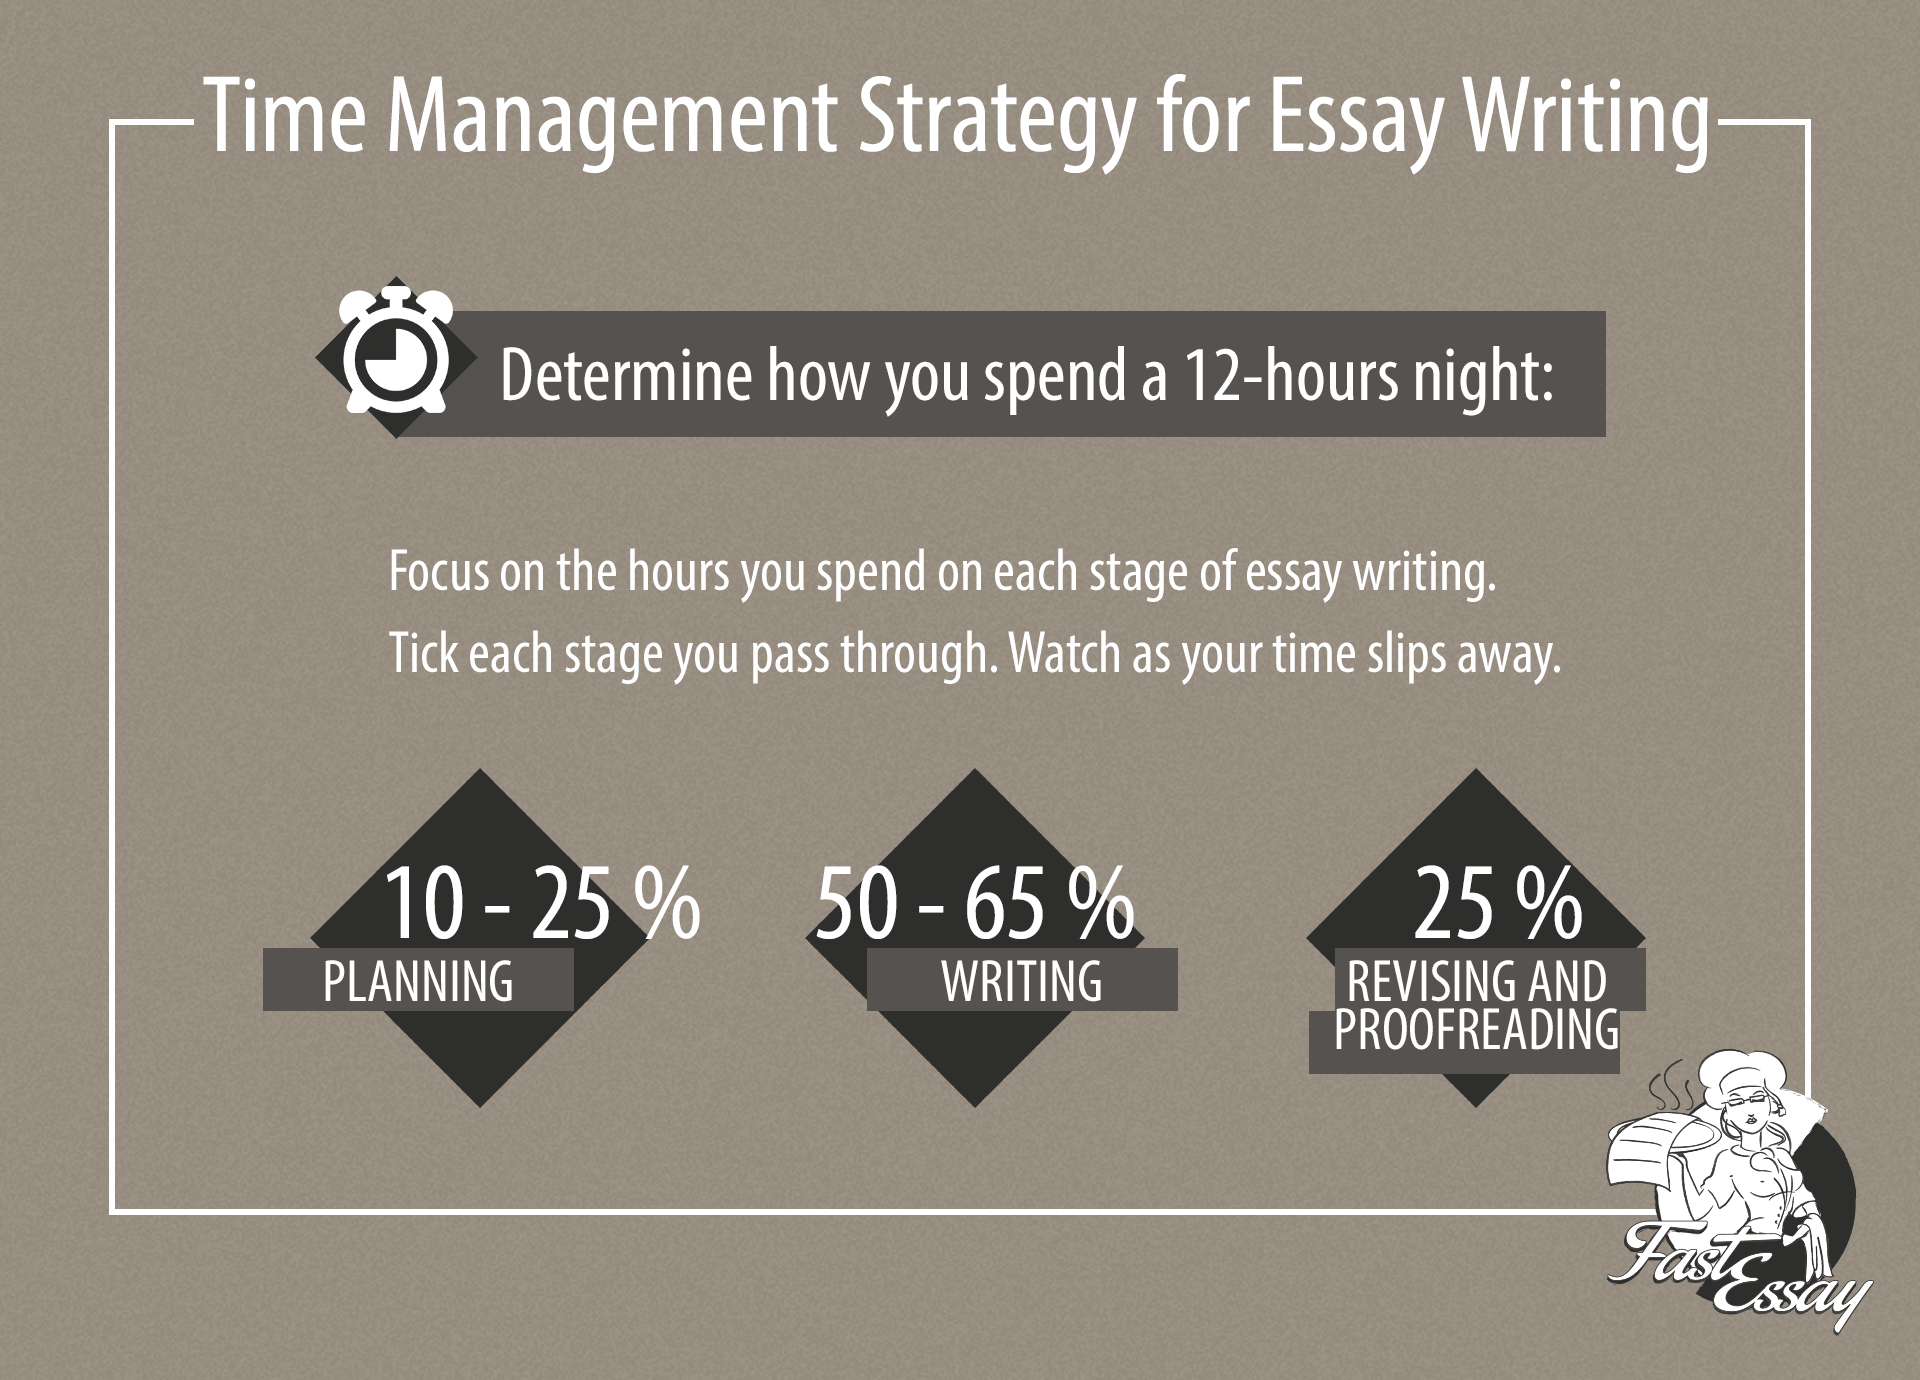 How to write an essay in one night 42099 - How to write an essay in one night